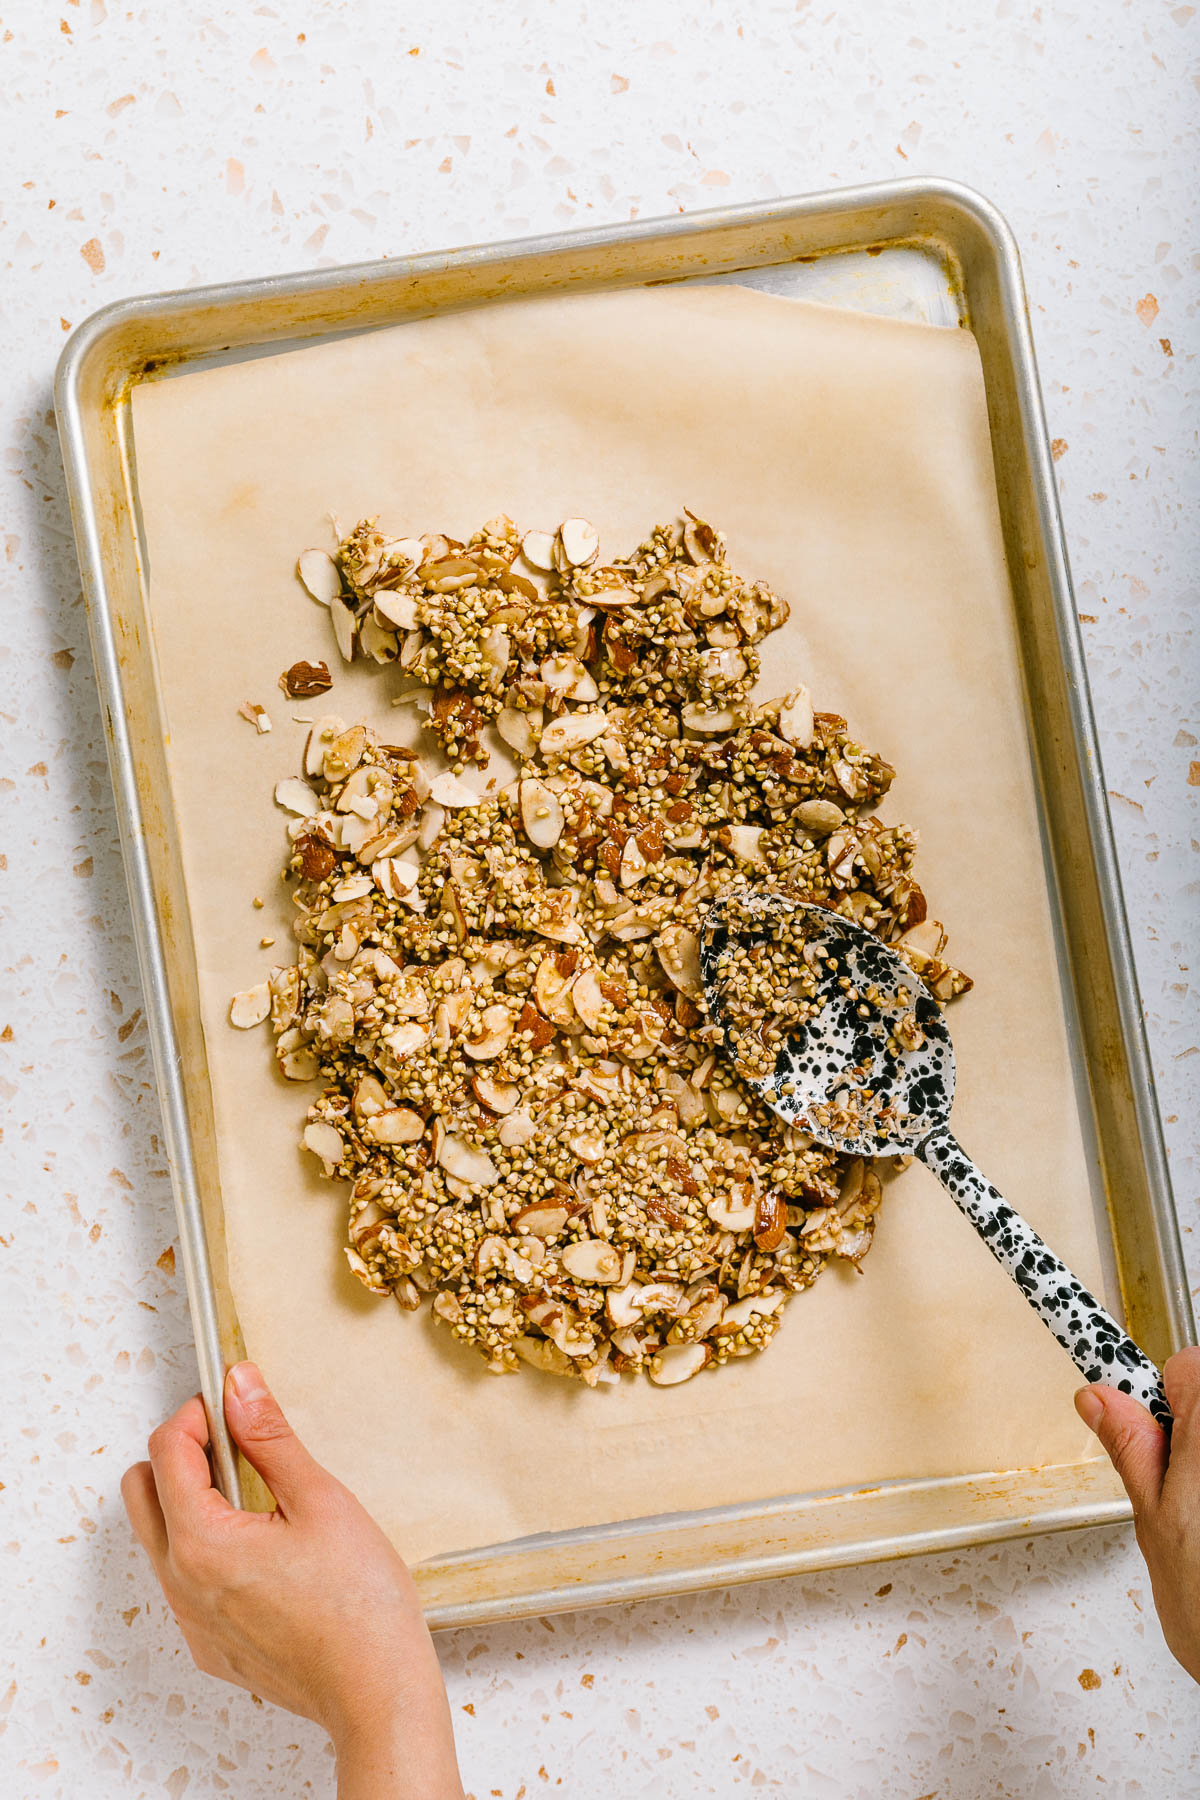 A hand using a large spoon to spread a mixture of brown rice syrup and nuts onto a baking sheet lined with parchment.